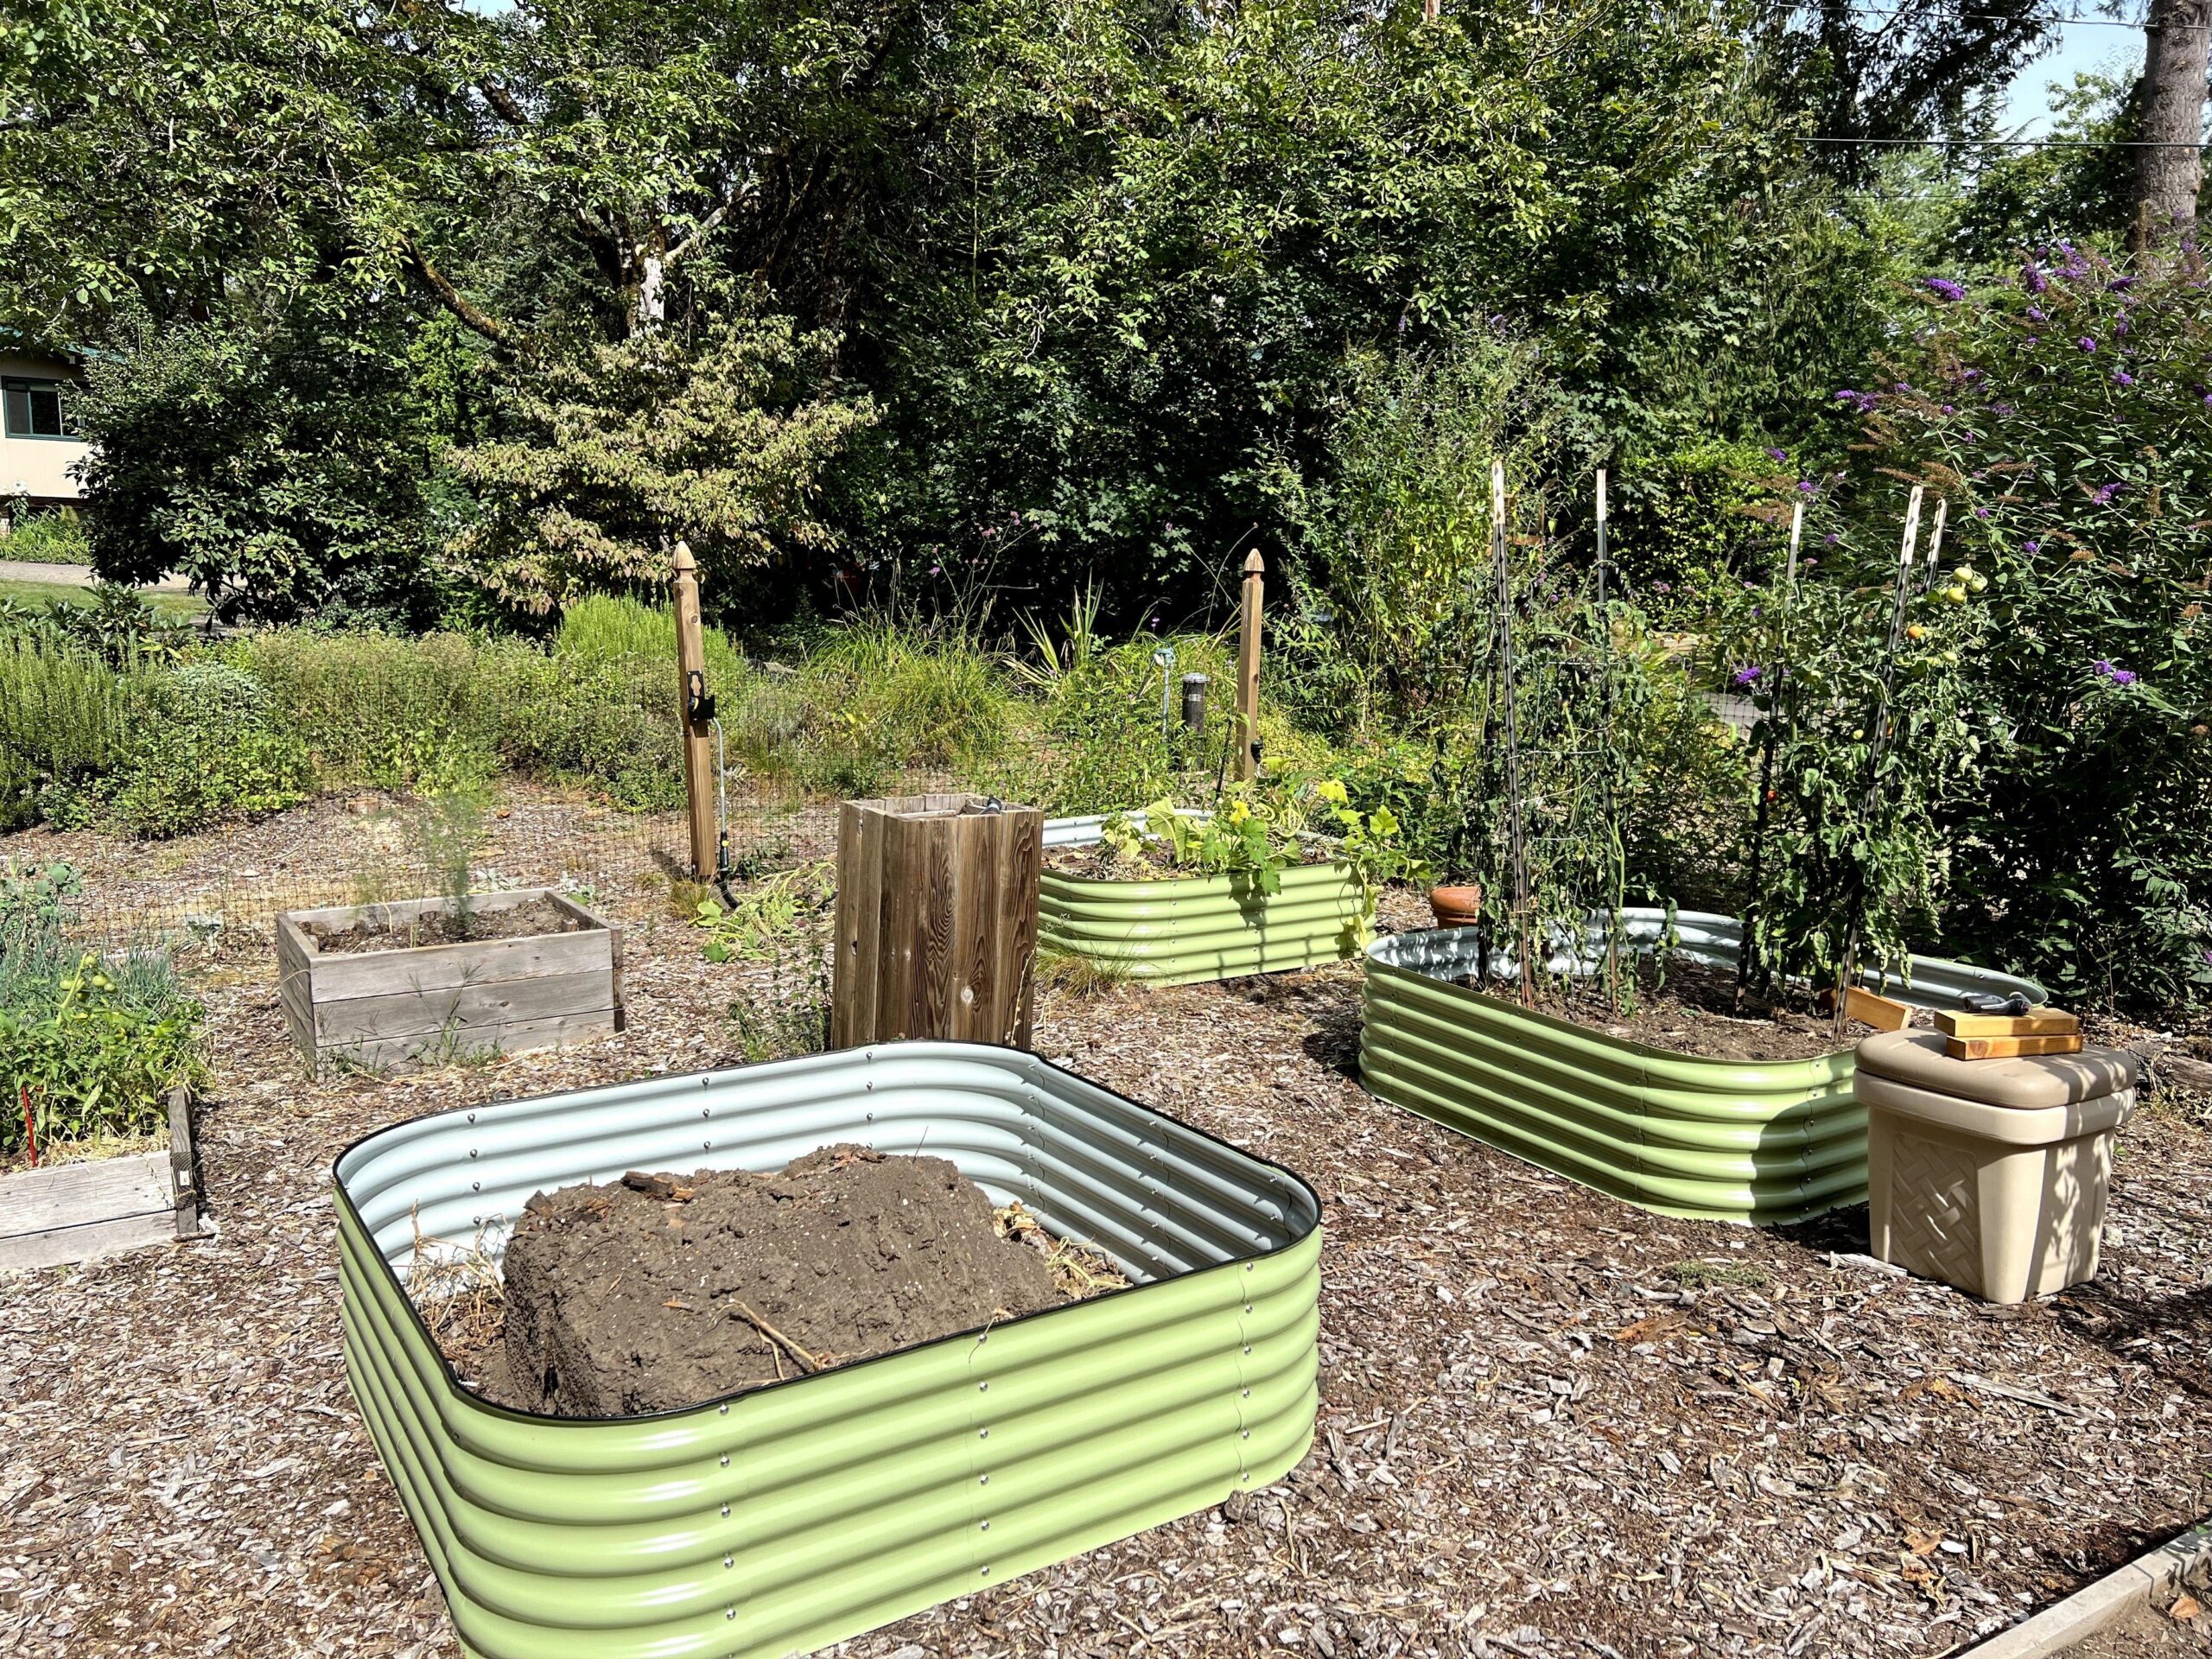 Elevated Garden Beds Made of Galvanized Metal